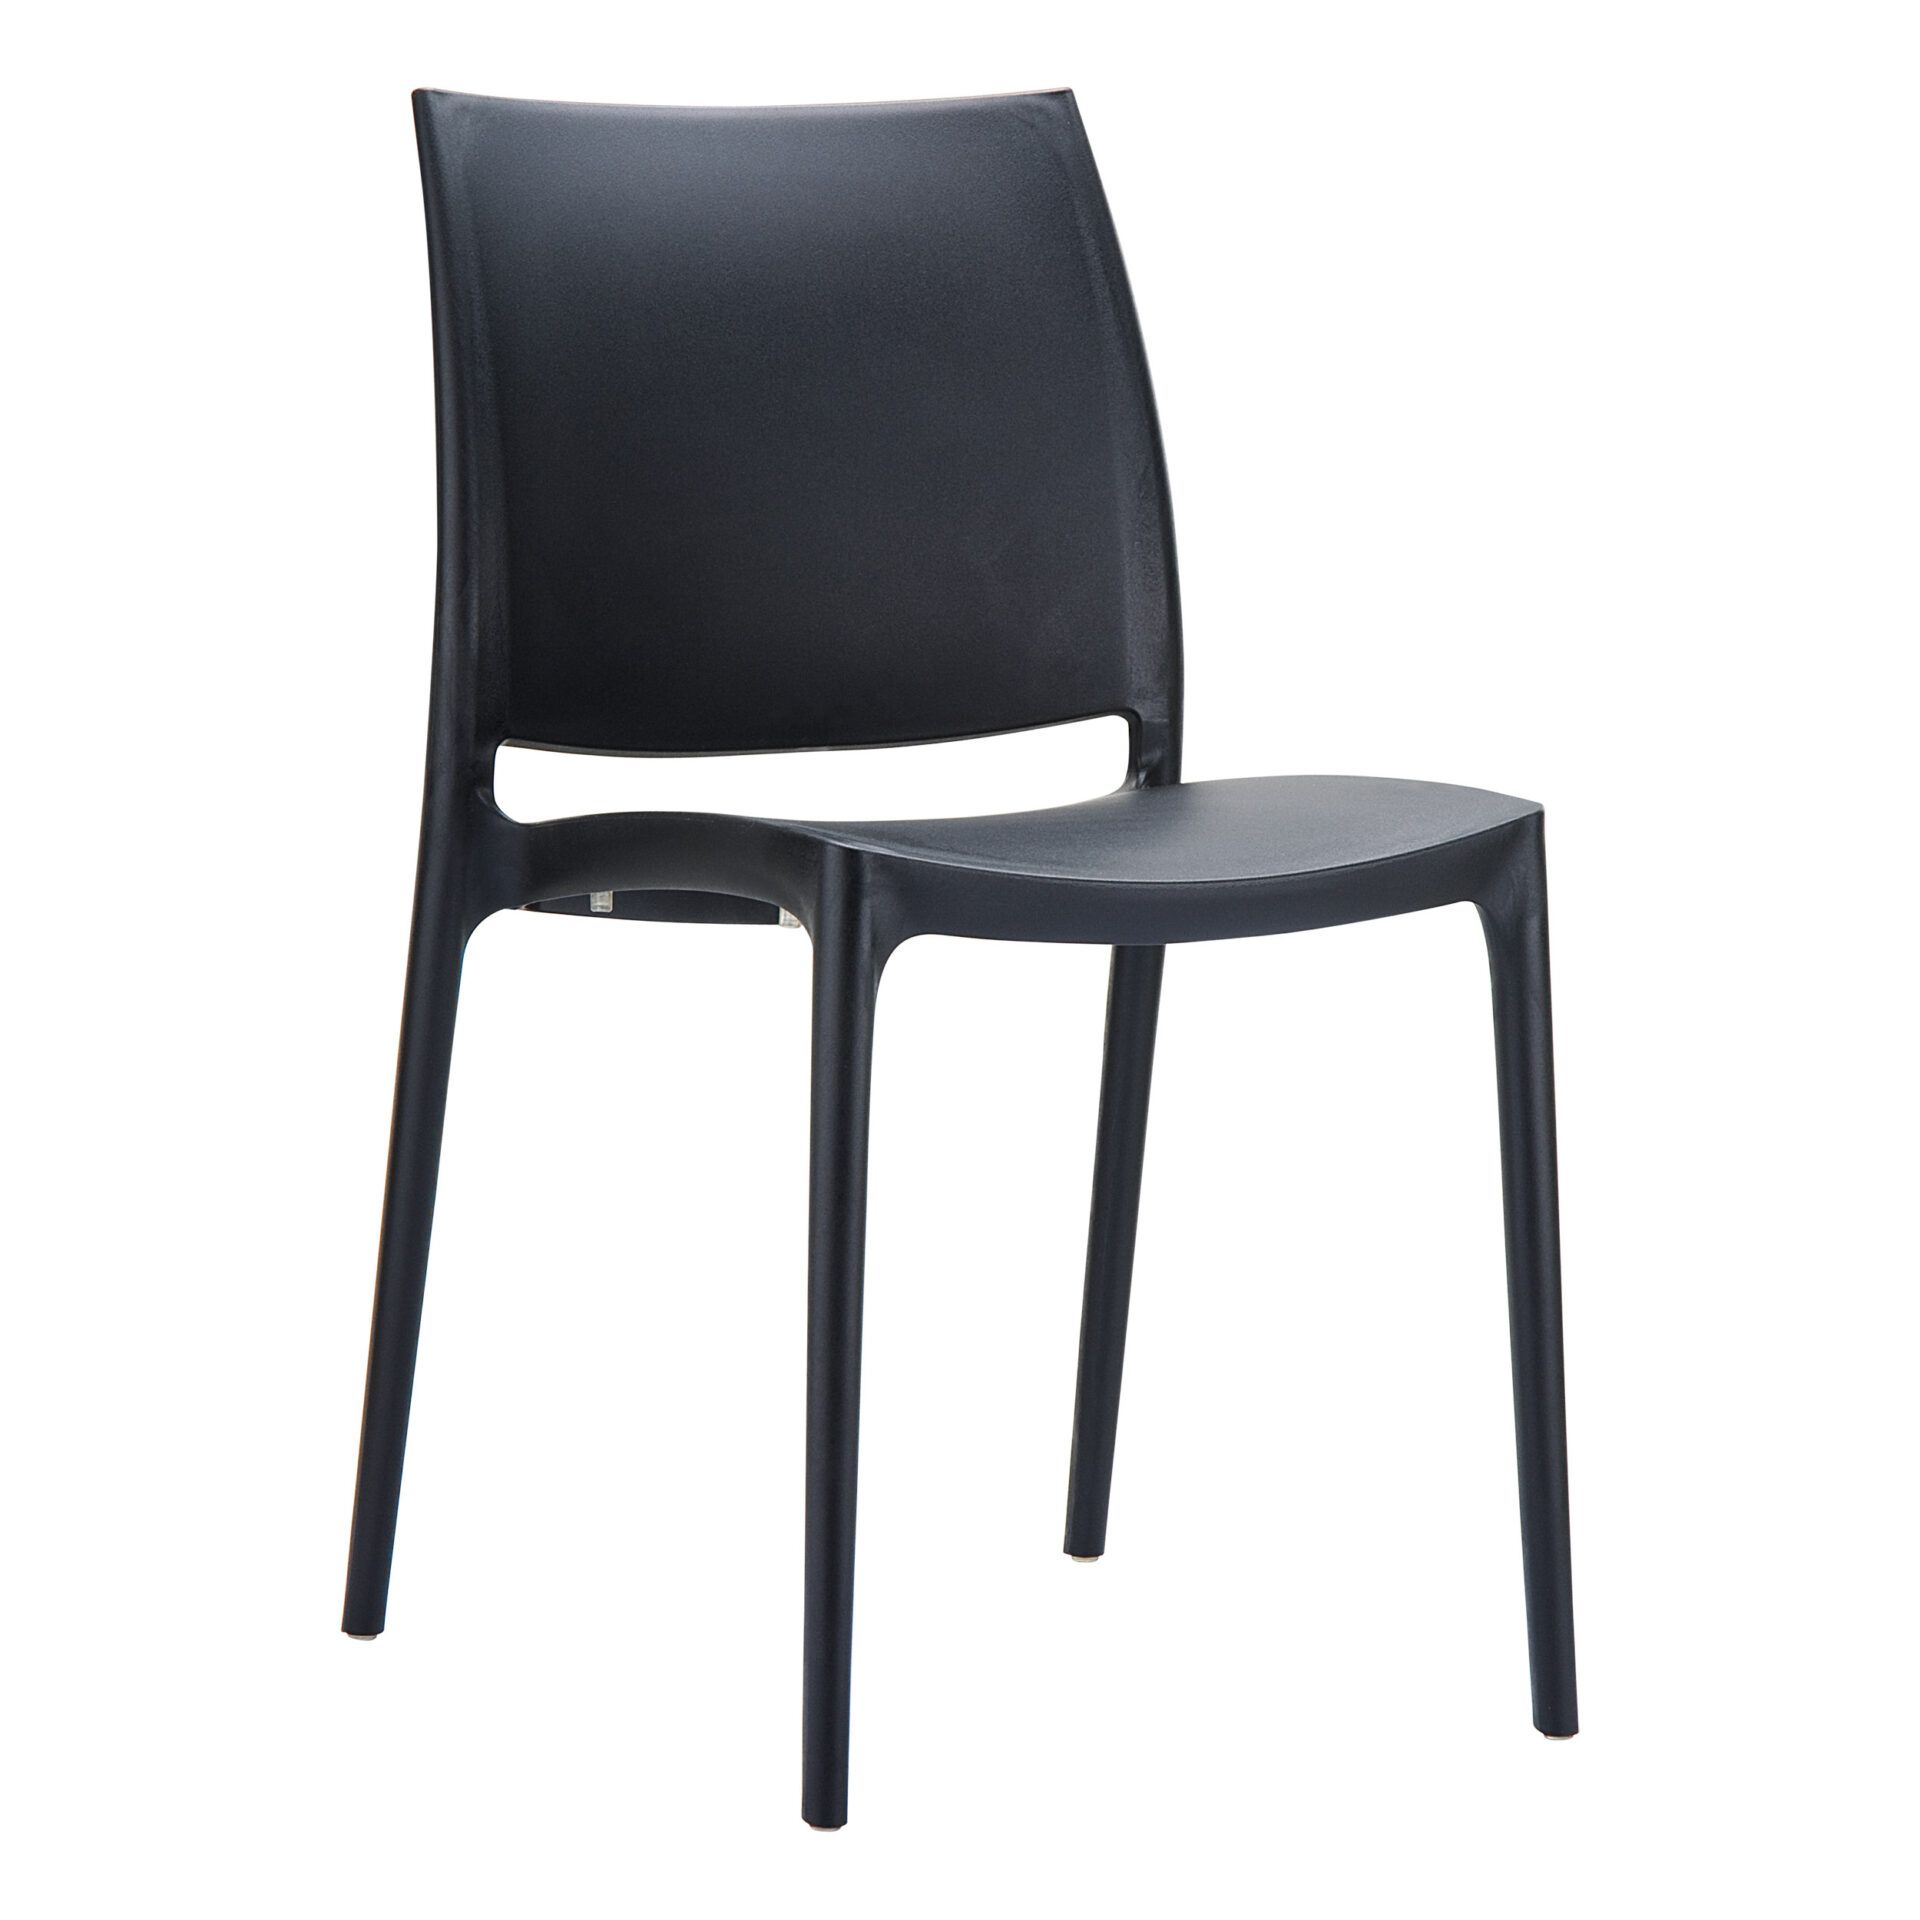 Maya Outdoor Café Chair colour BLACK available to order now!